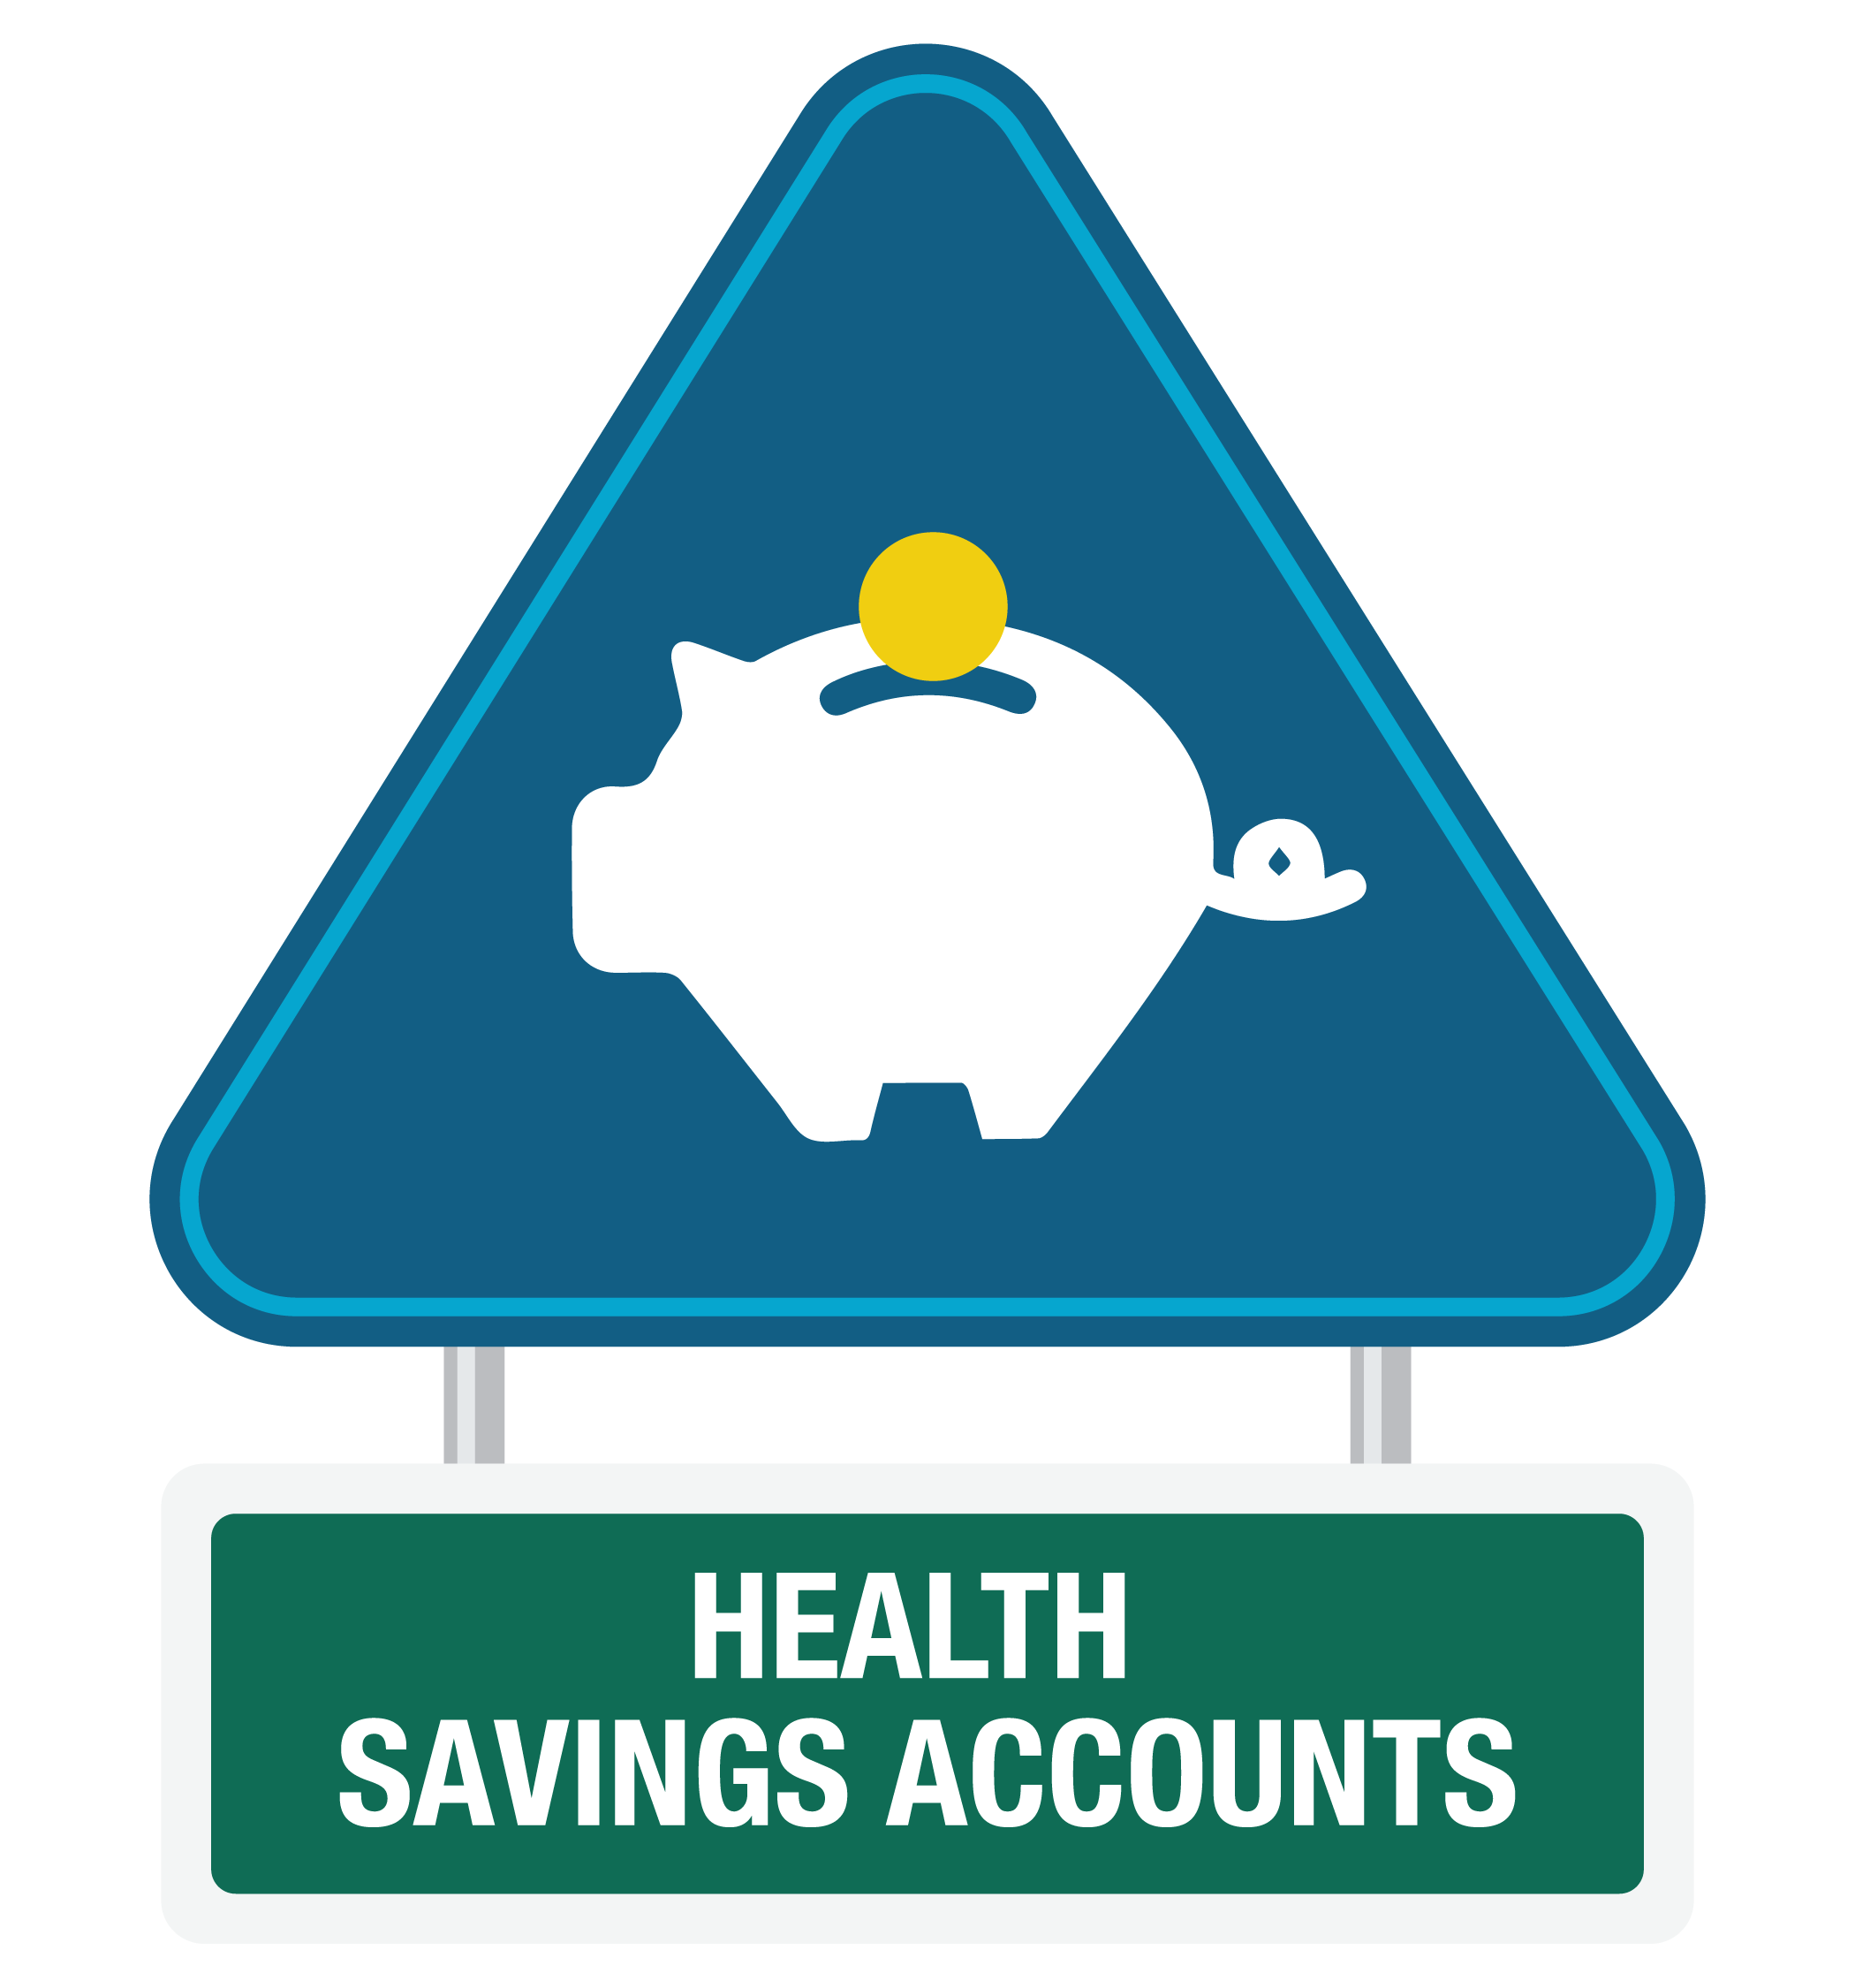 Click for details on Health Savings Accounts